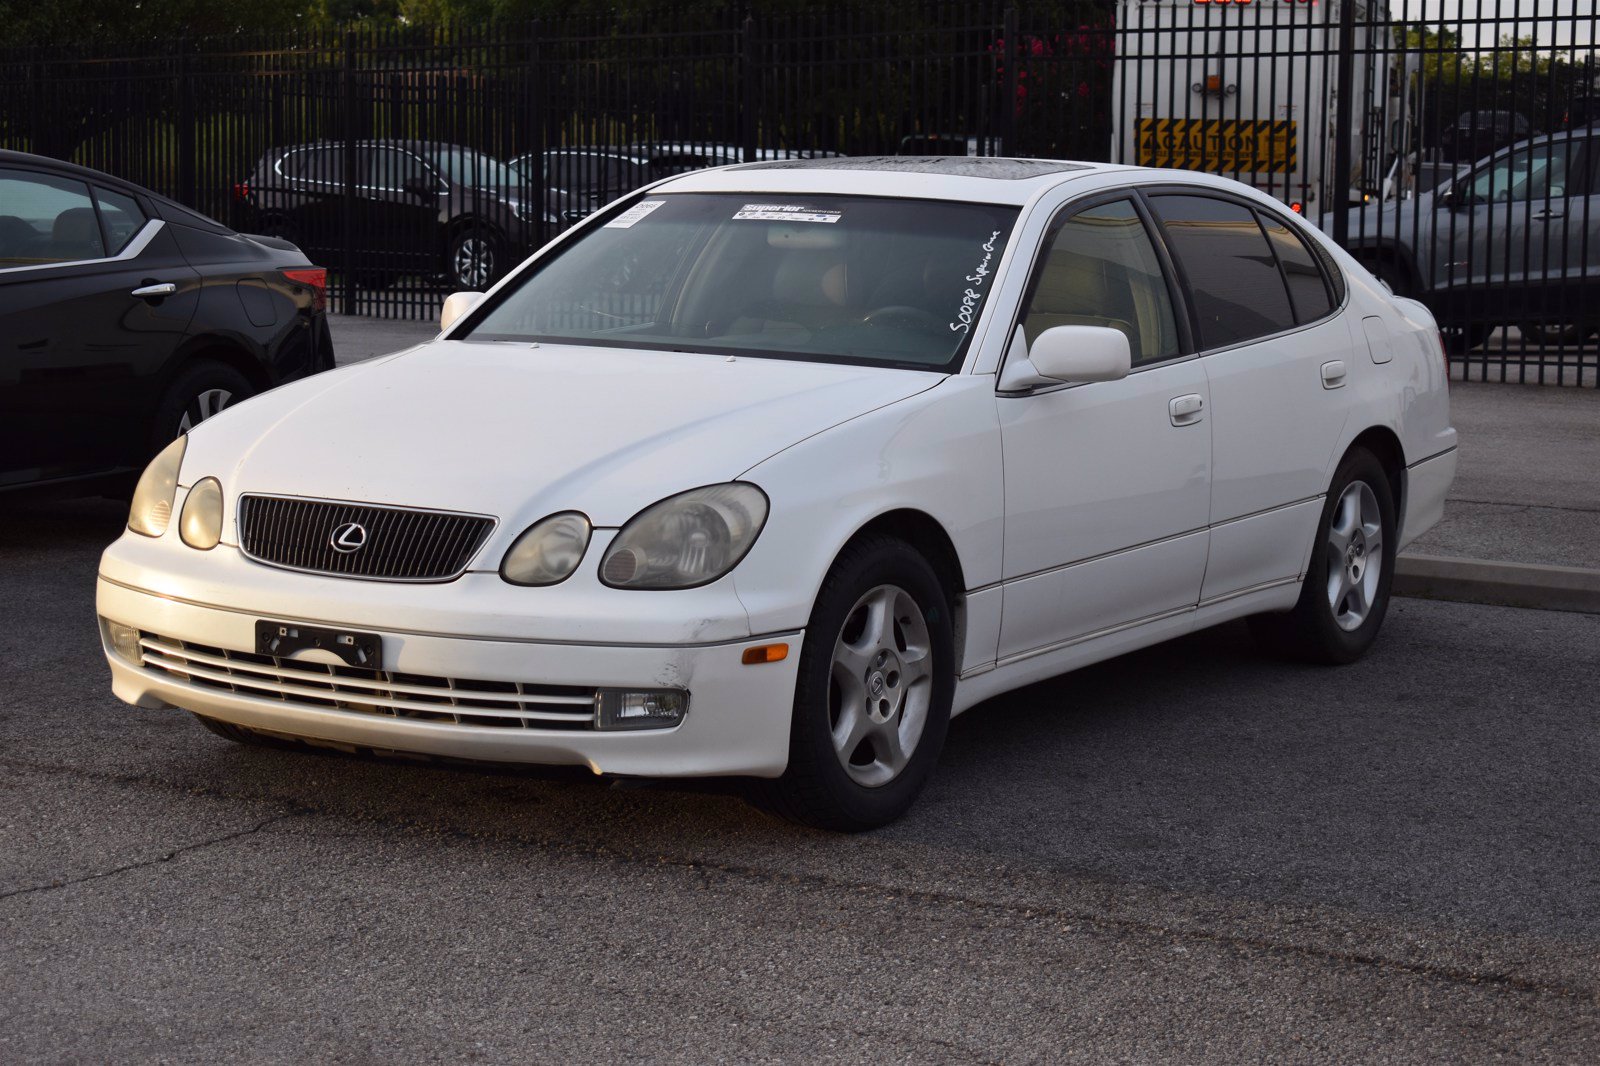 PreOwned 2000 Lexus GS 400 4dr Car in Fayetteville 